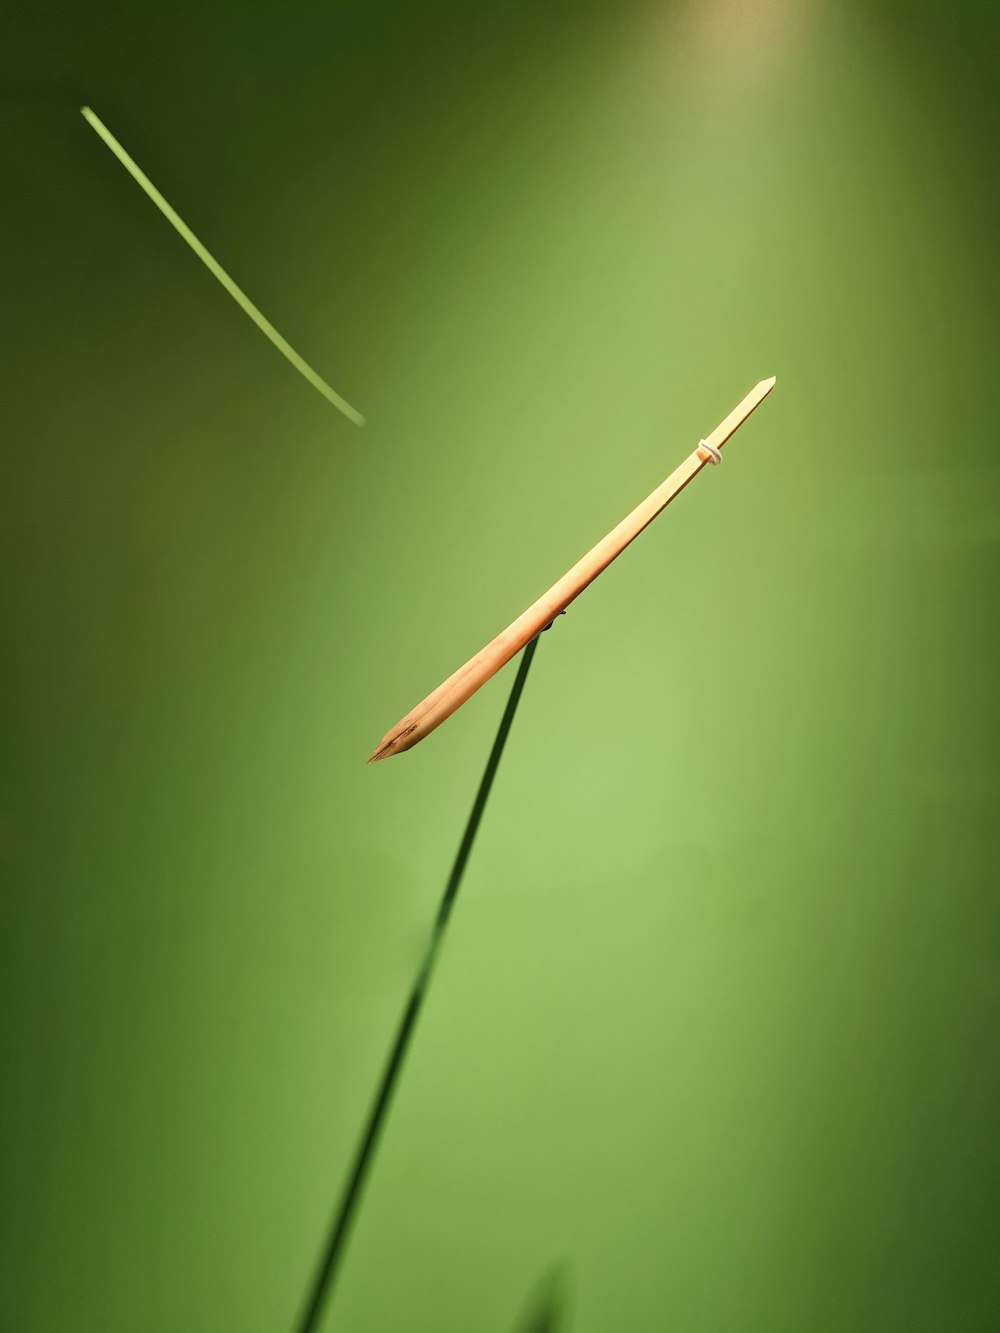 a single long stem of a plant on a green background